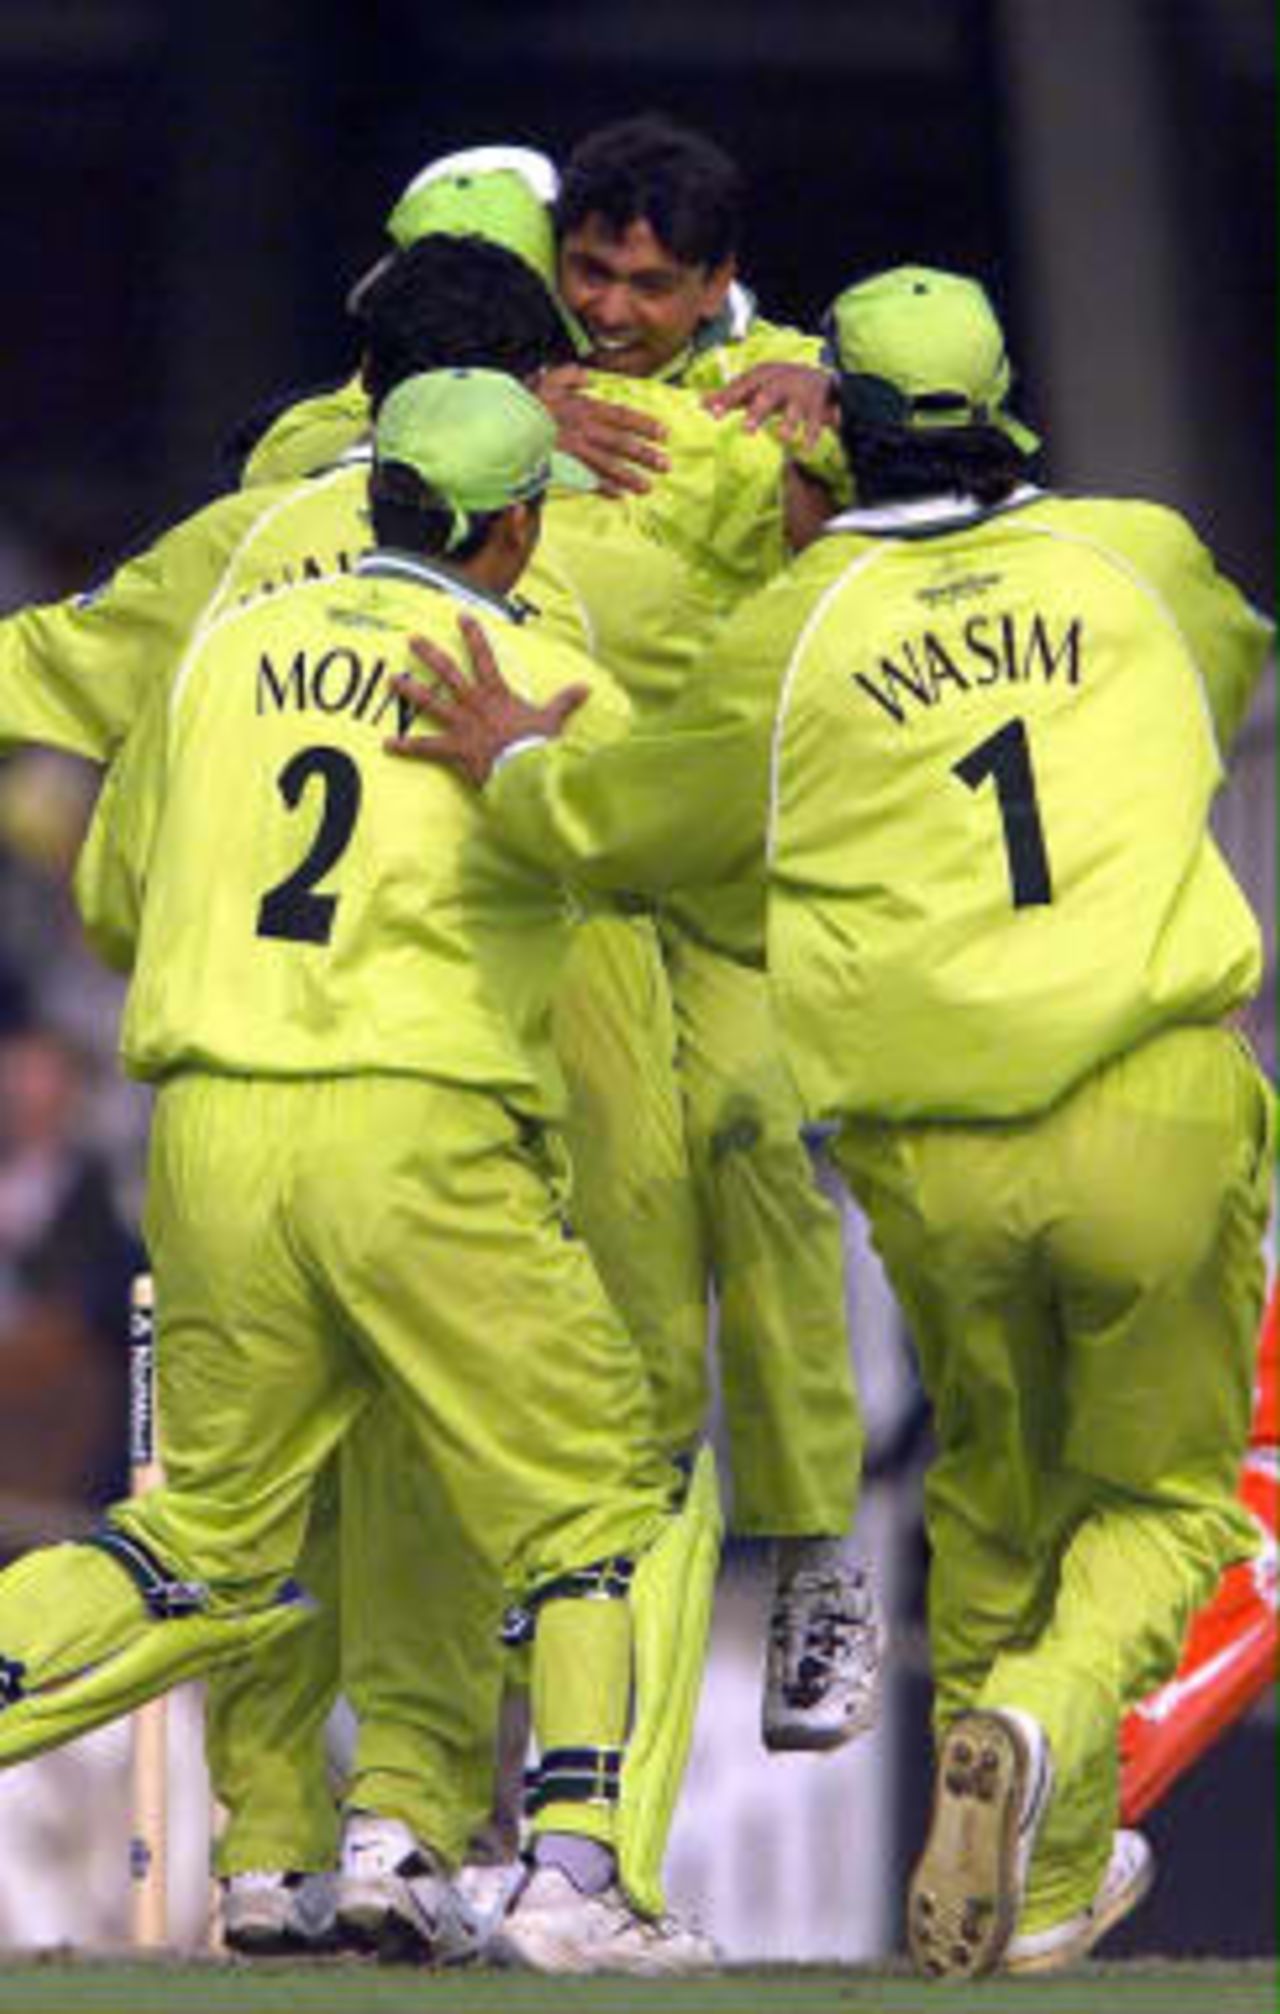 Saqlain Mushtaq (Center facing) of Pakistan is congratulated by his teammates as Pakistan beat Zimbabwe at the Cricket World Cup match at the Oval, London, 11 June 1999.